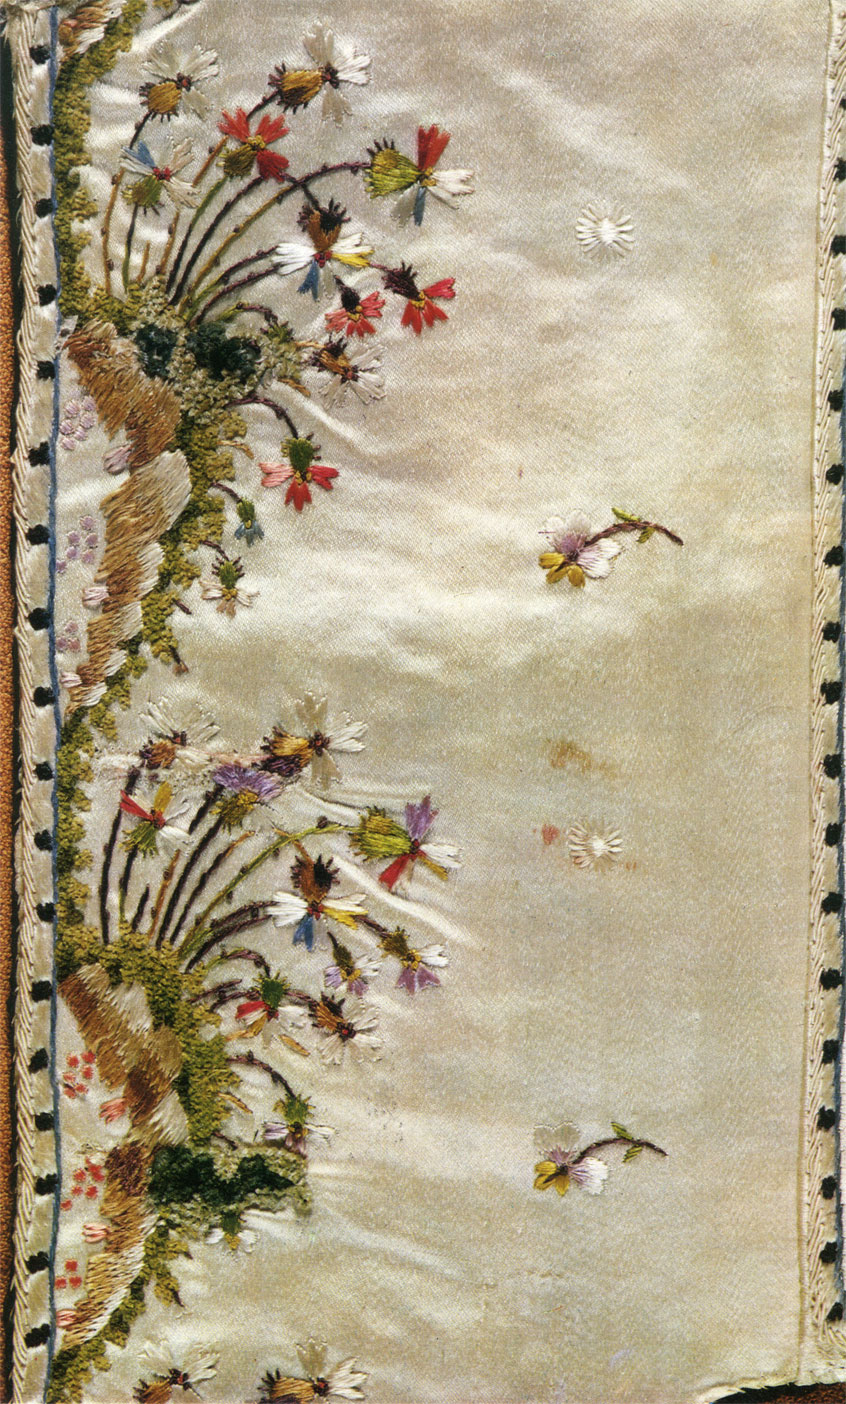 Embroidery on a jacket. Late 18th century. 43x38. RT-9679